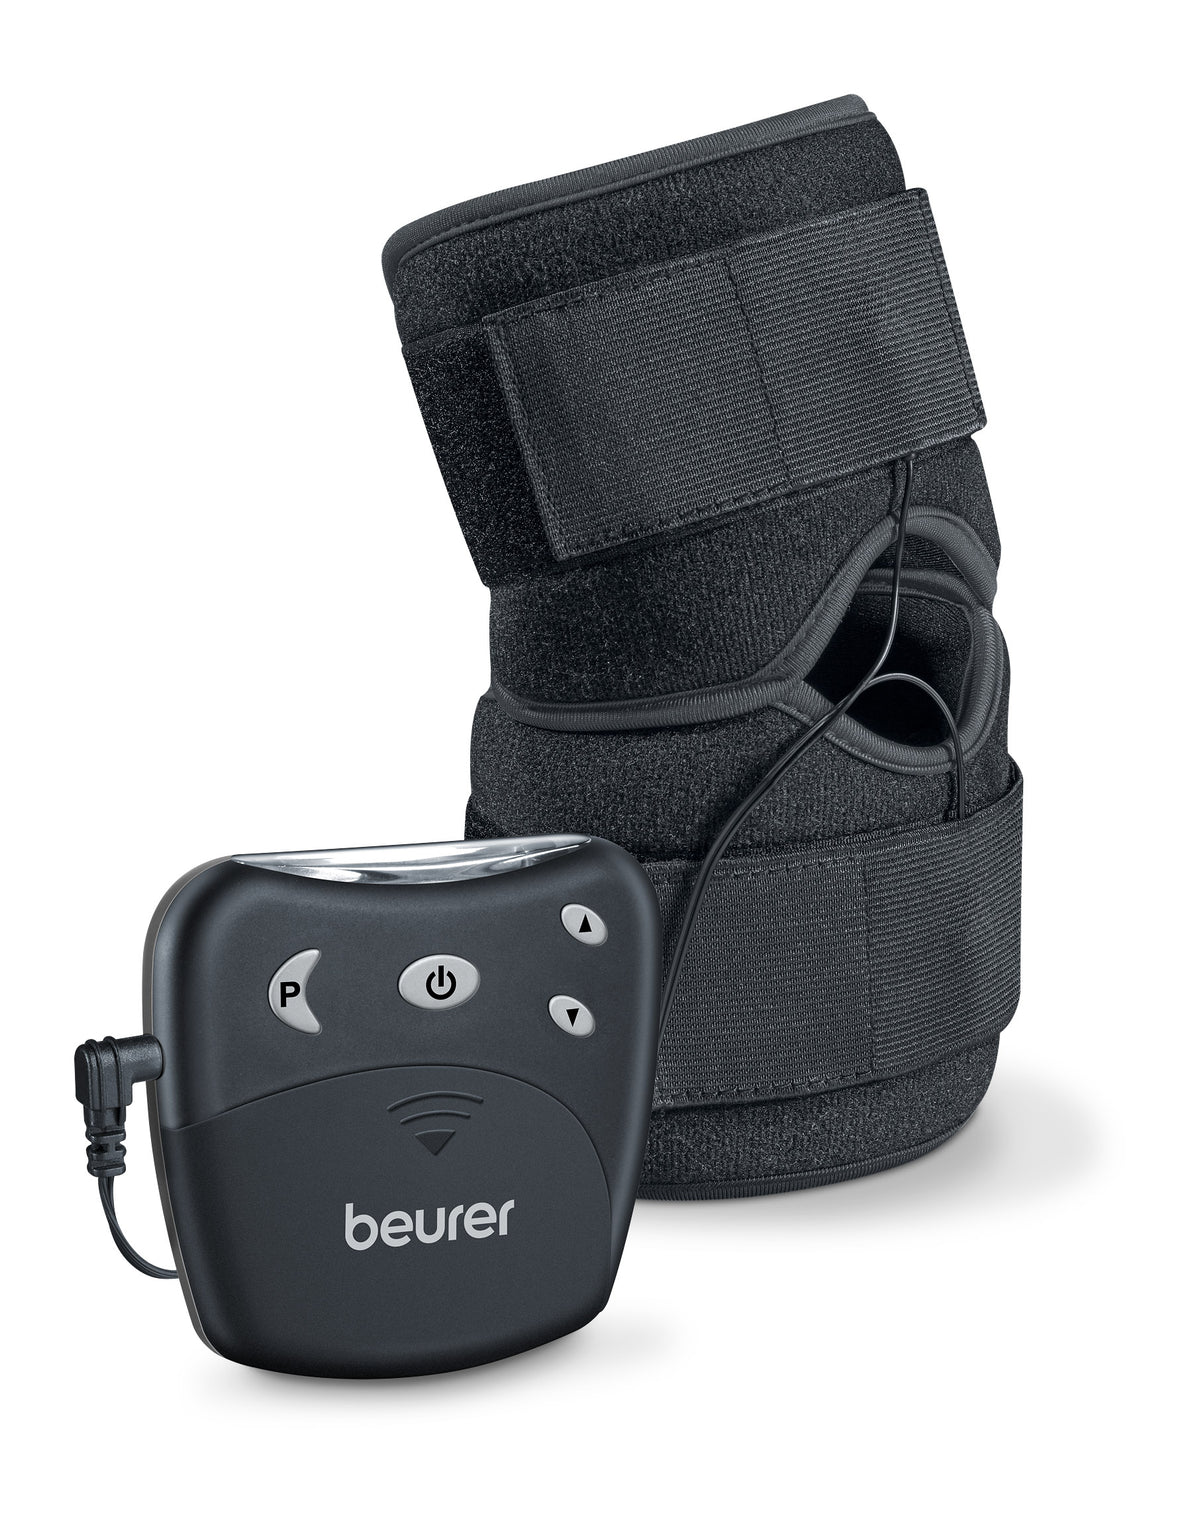 Beurer 2-in-1 Tens Device for Knee and Elbow EM34 for sale online